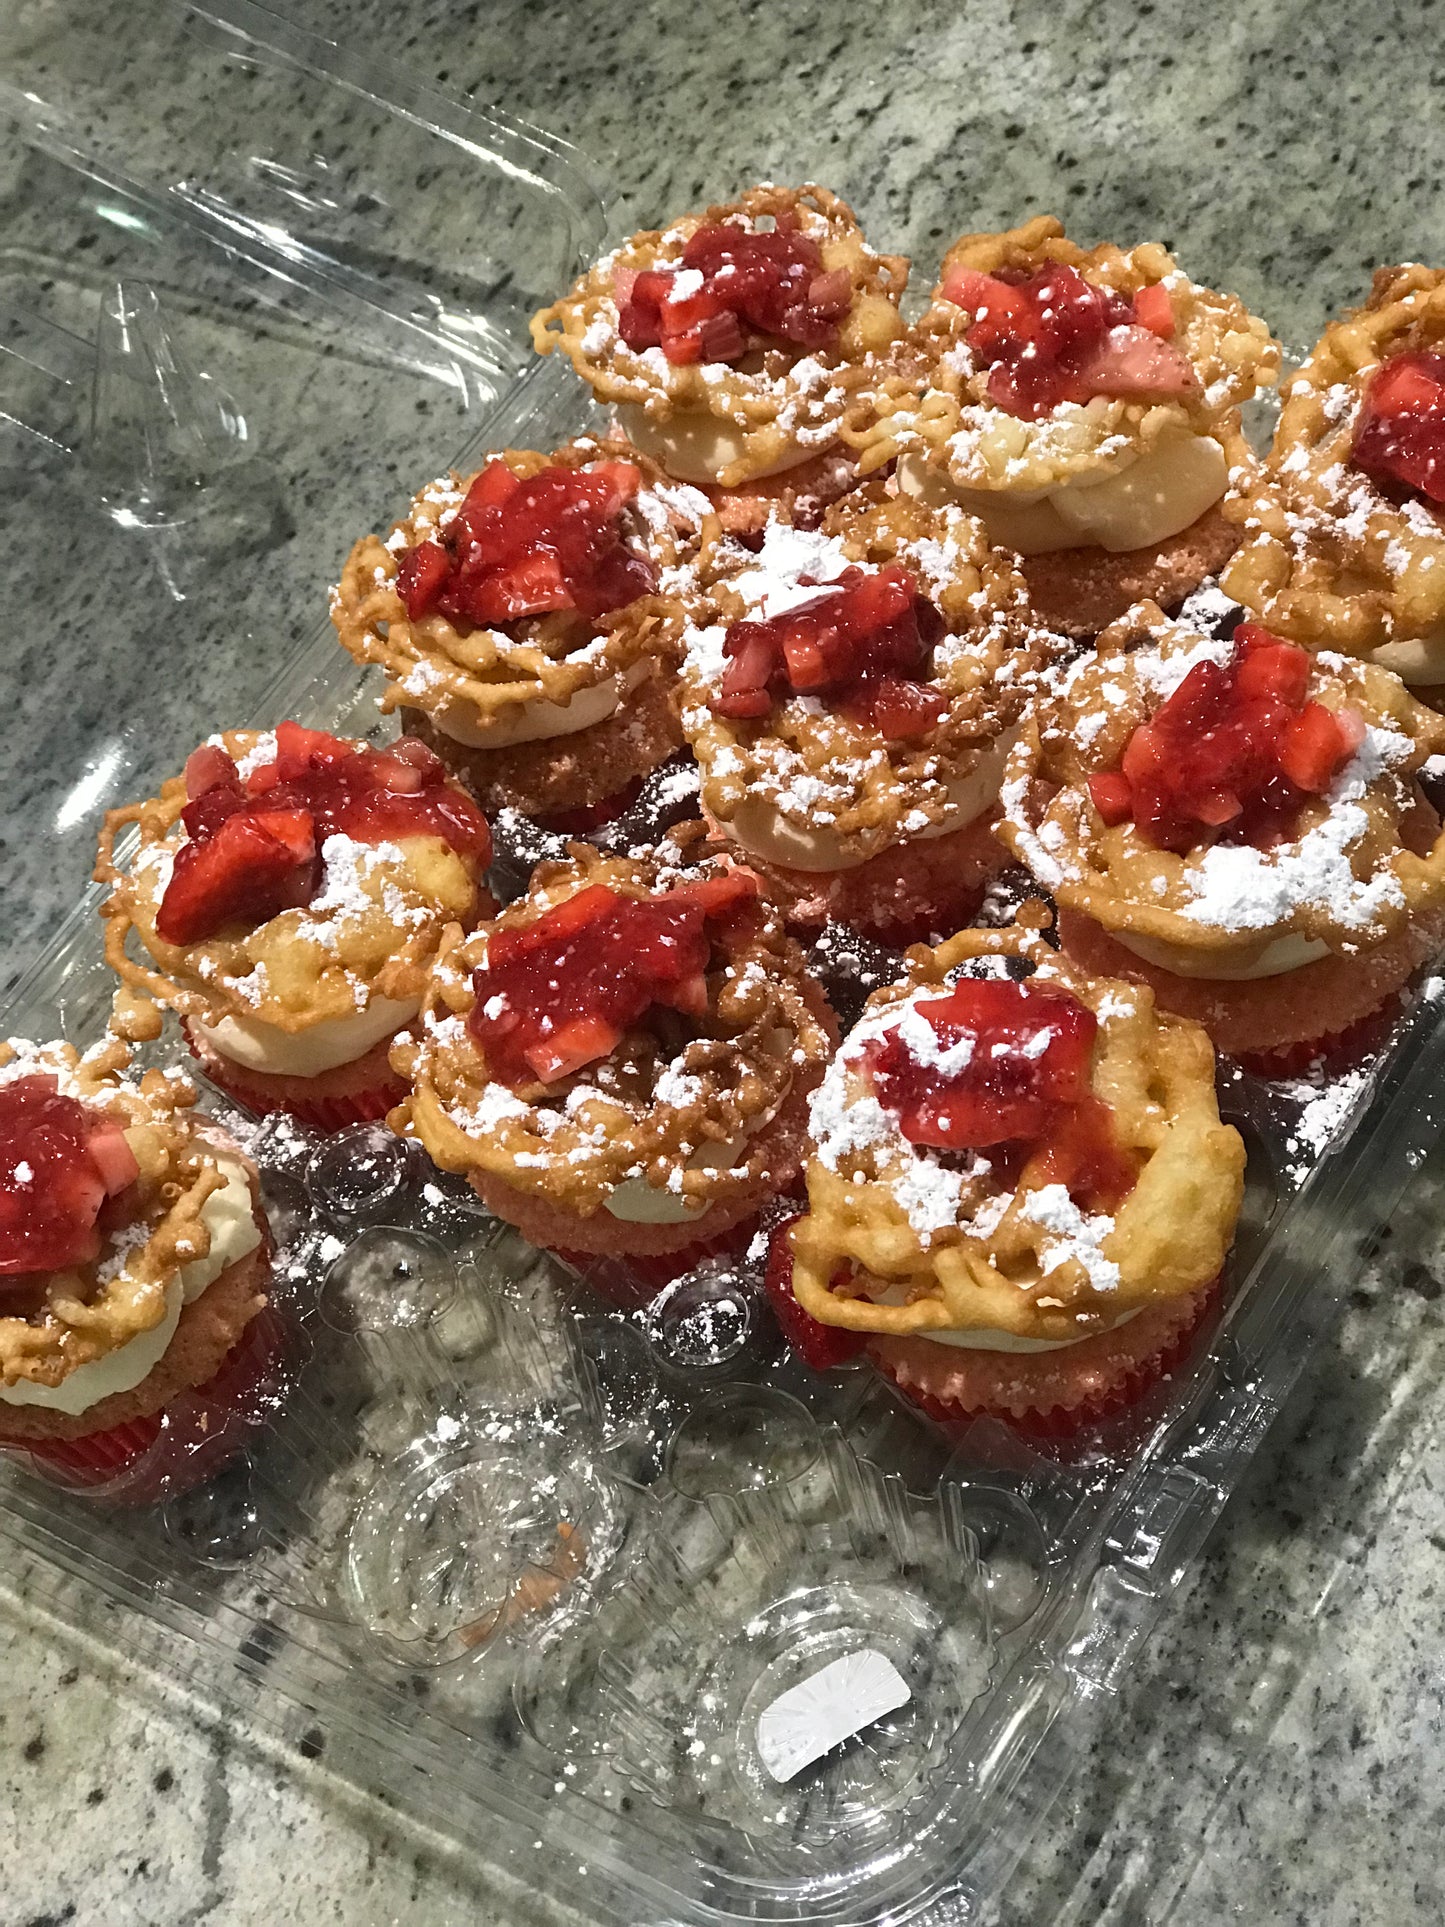 Funnel Cake Cupcakes